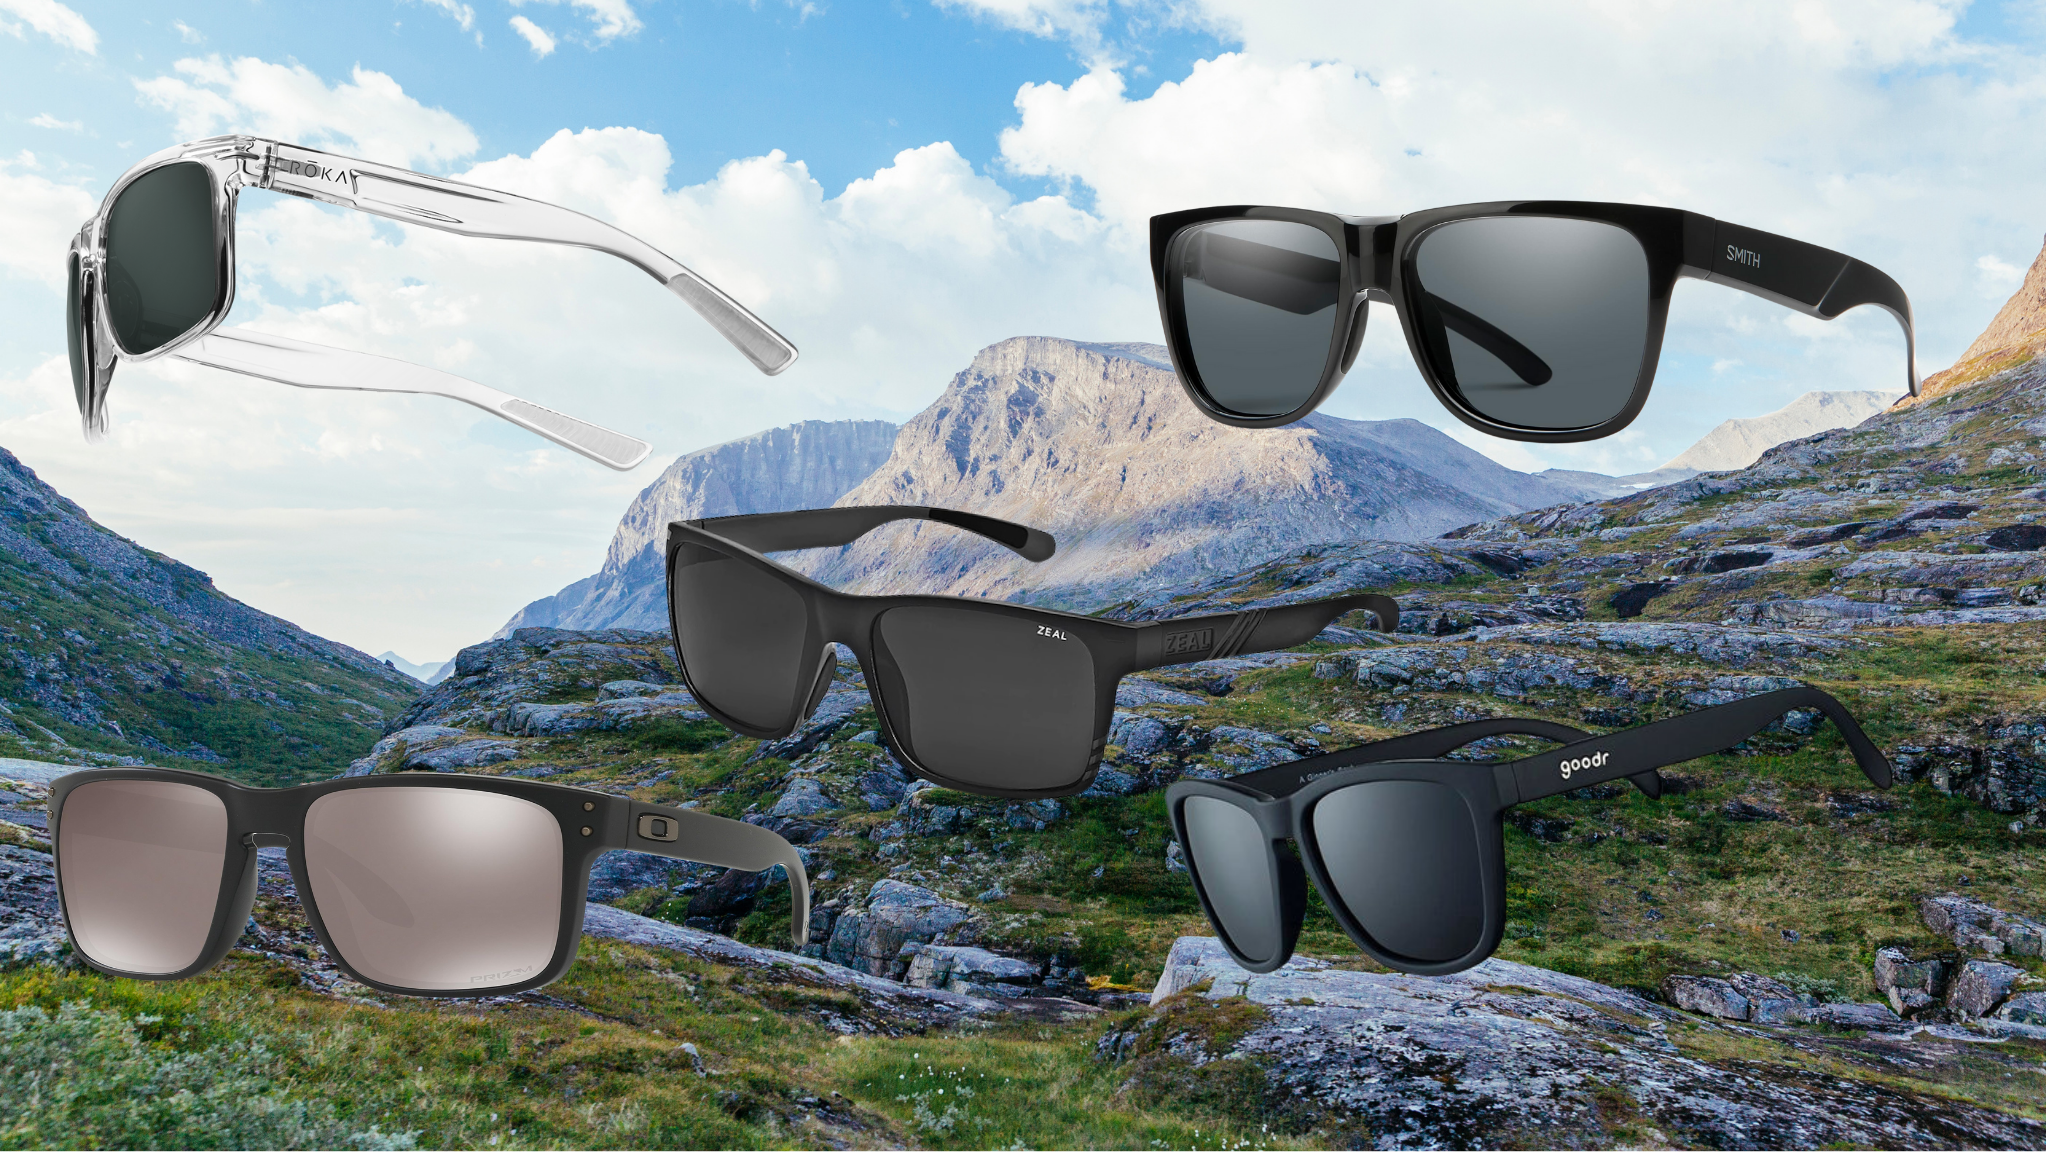 Shades in Style: Lifestyle Shades for the Active Man